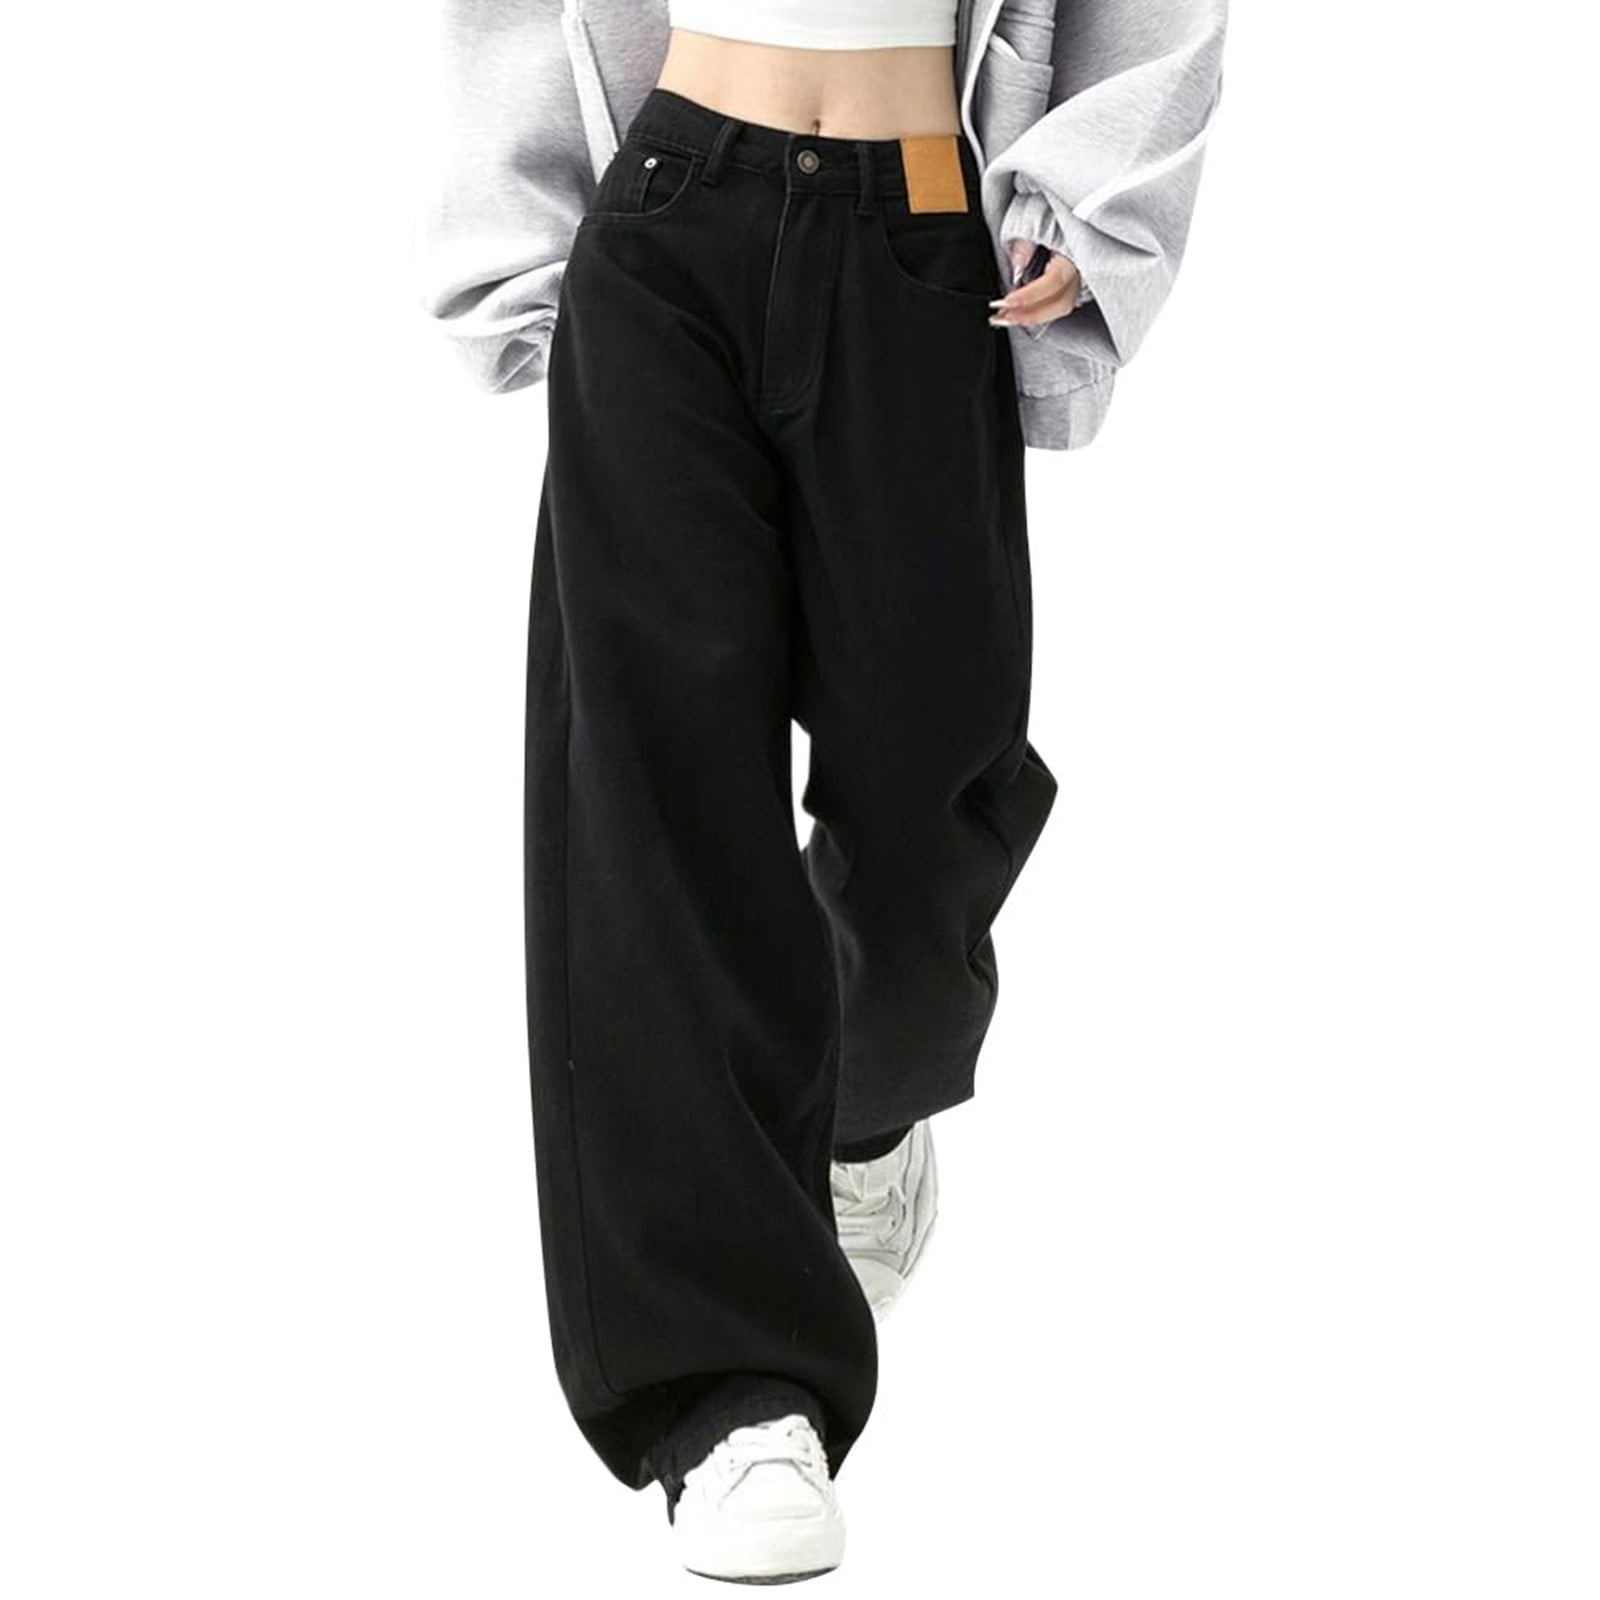 Women Baggy Jeans With High Waist Straight Wide Leg Denim Trousers